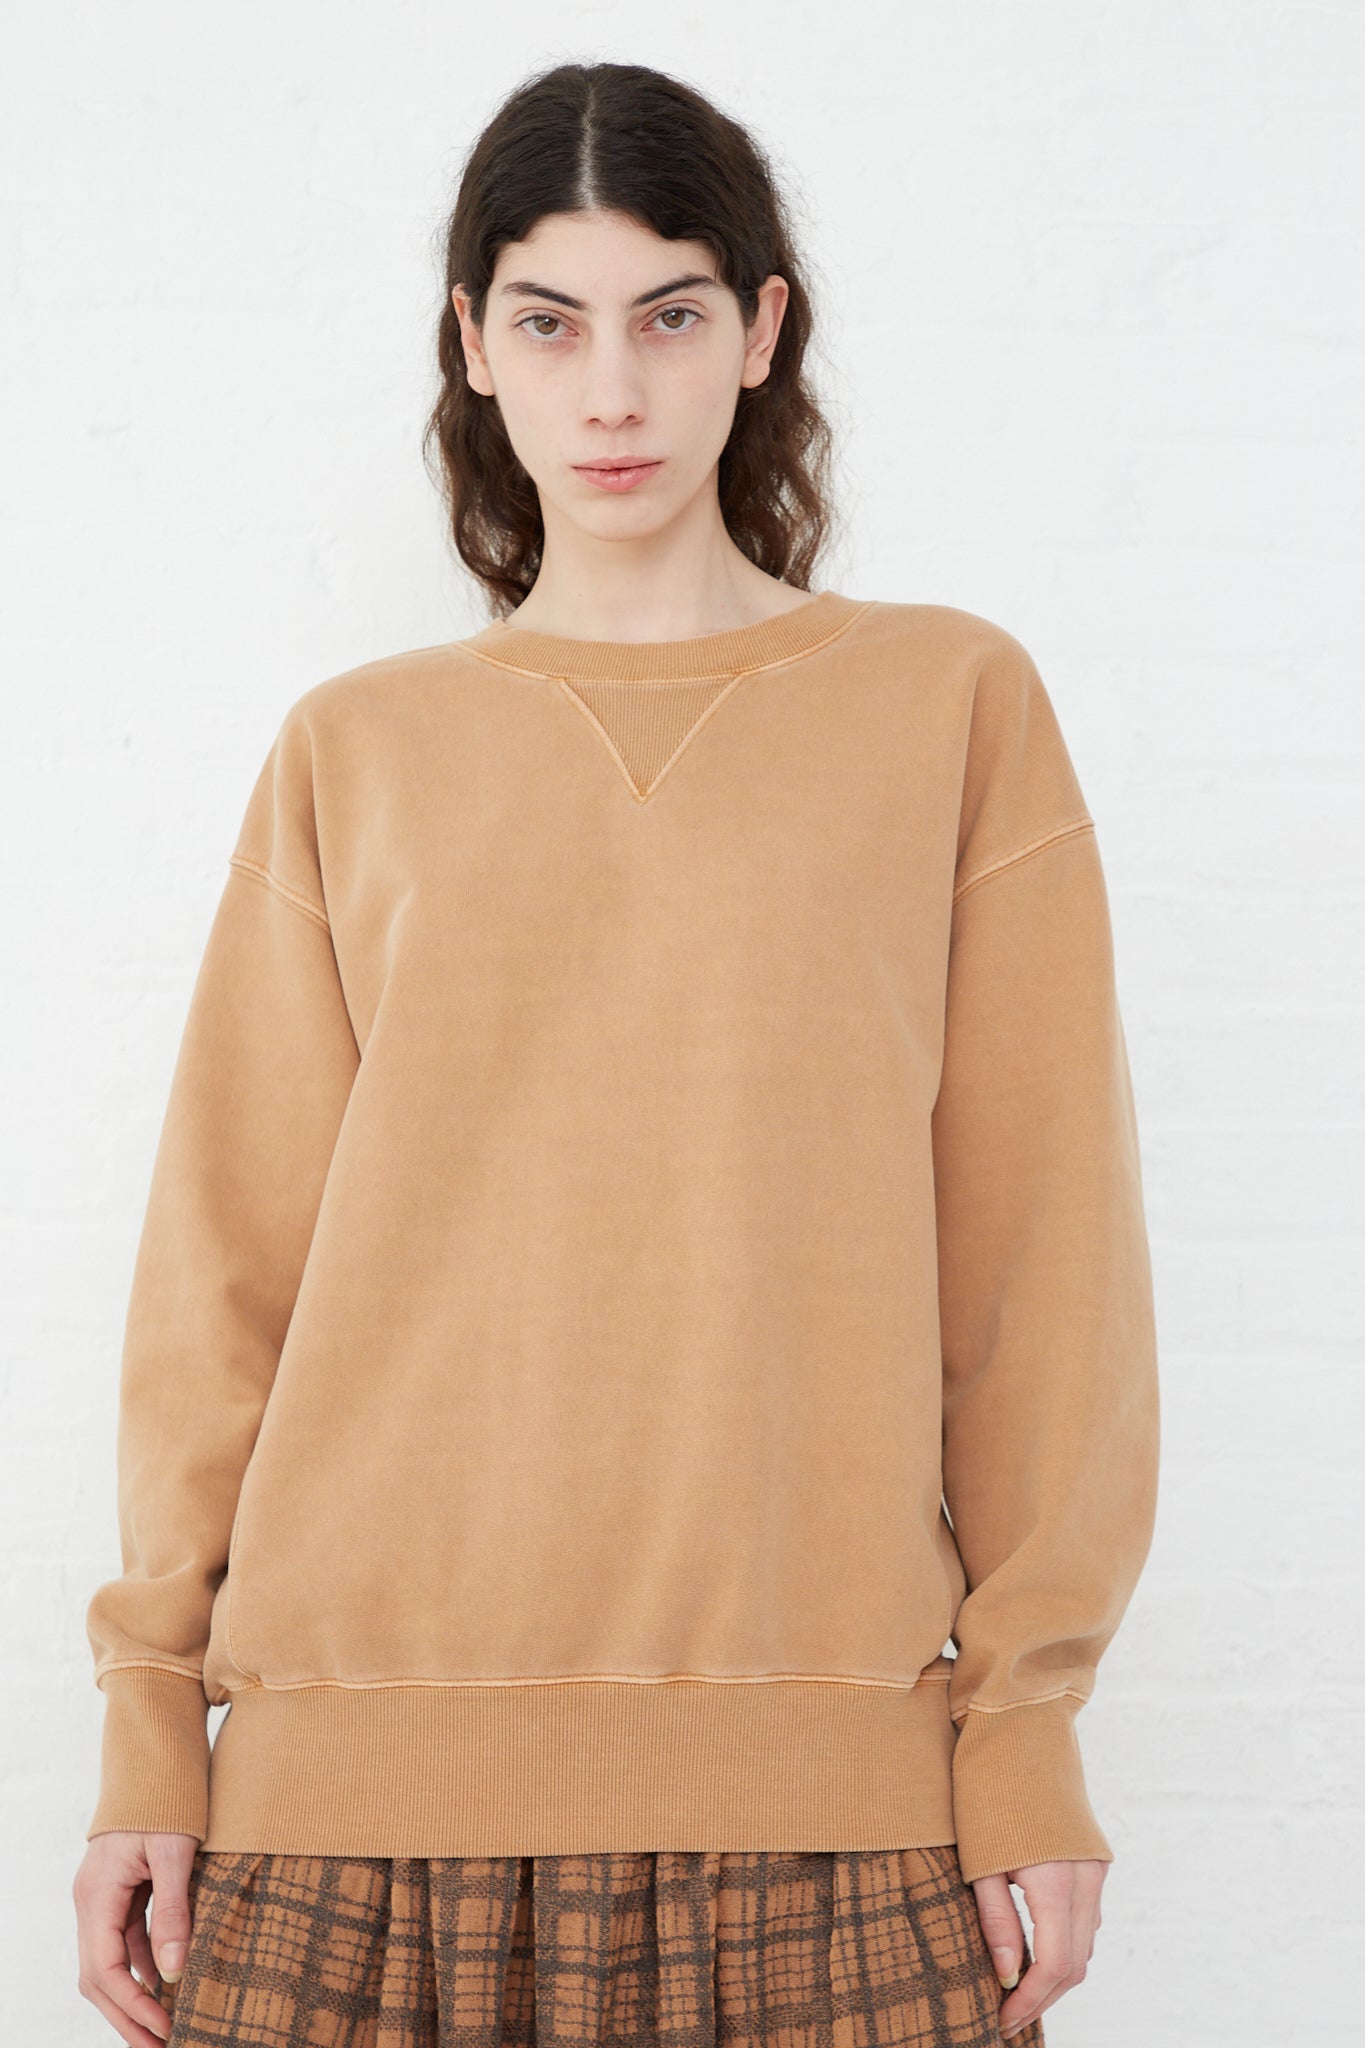 The model is wearing an oversized fit Pigment French Terry Cotton Pullover in Camel by Ichi Antiquités.